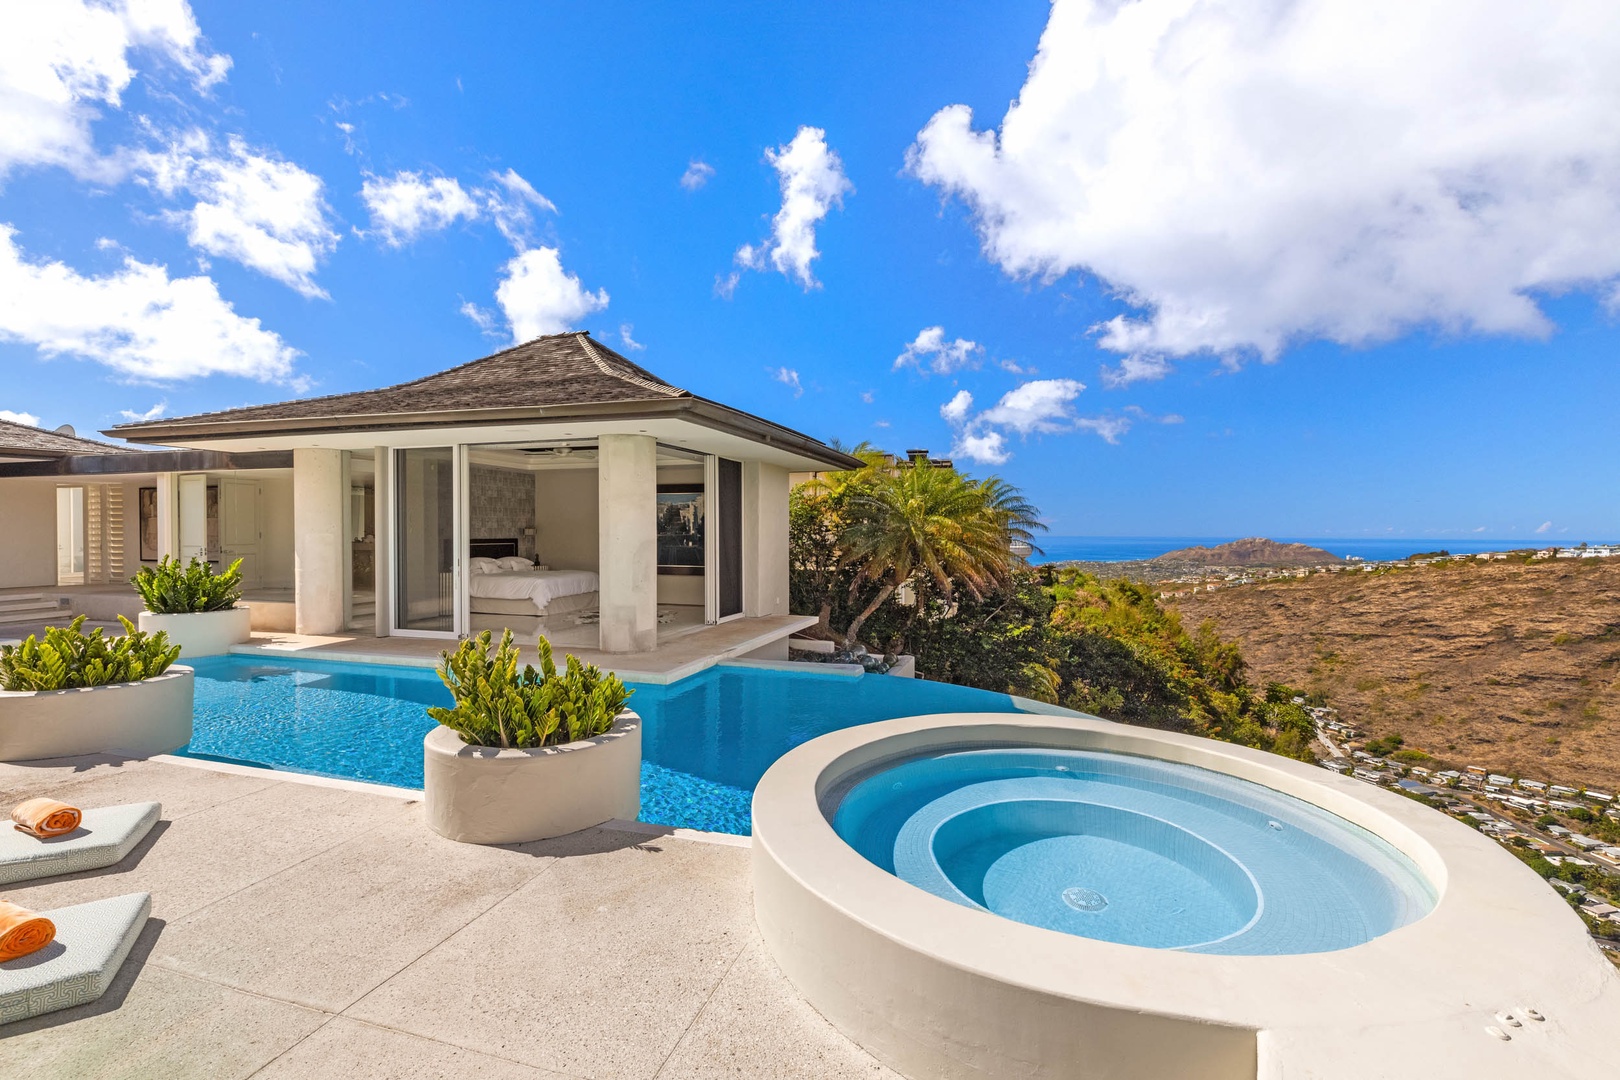 Honolulu Vacation Rentals, Sky Ridge House - Relax in pure luxury, where the sky meets the spa pool and breathtaking views await at every turn.